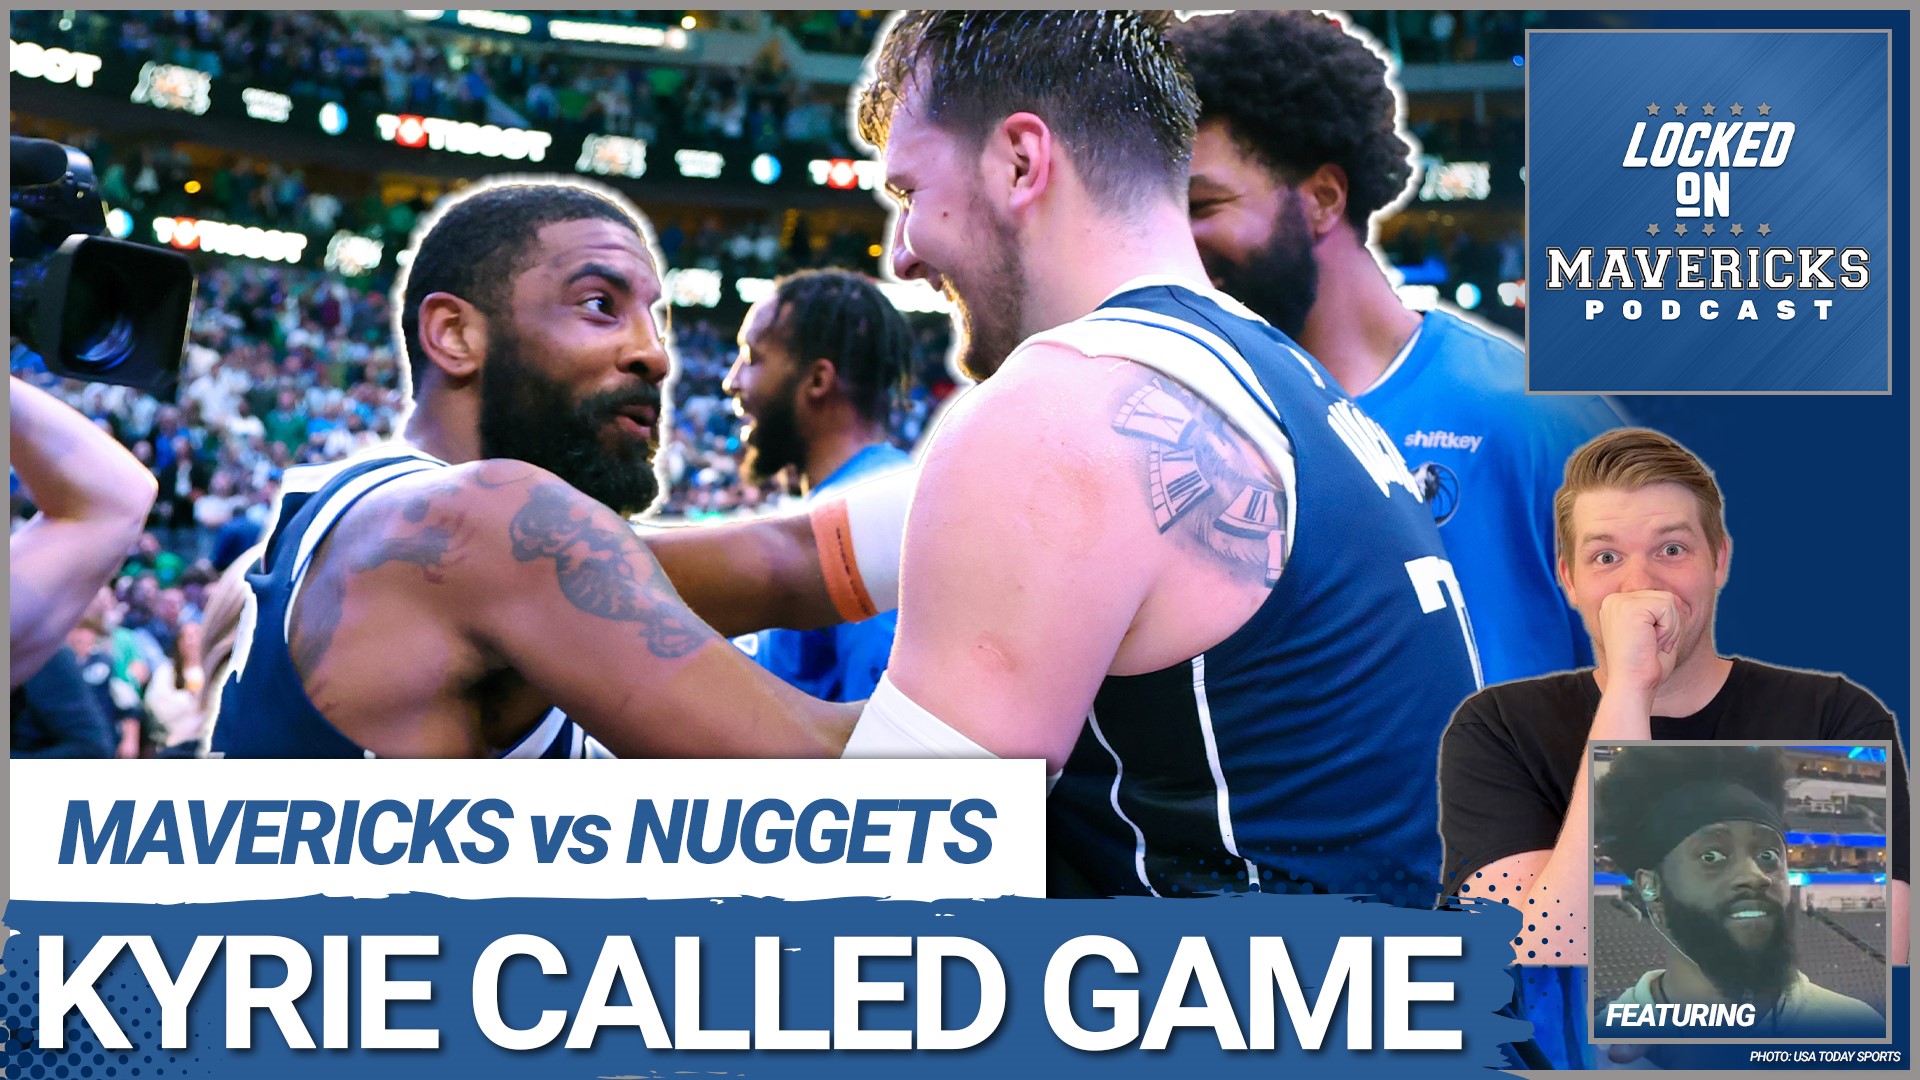 Nick Angstadt & Reggie Adetula react to Kyrie Irving's game-winner, Luka Doncic carrying the Dallas Mavericks' offense, and the Mavs playing bully ball.